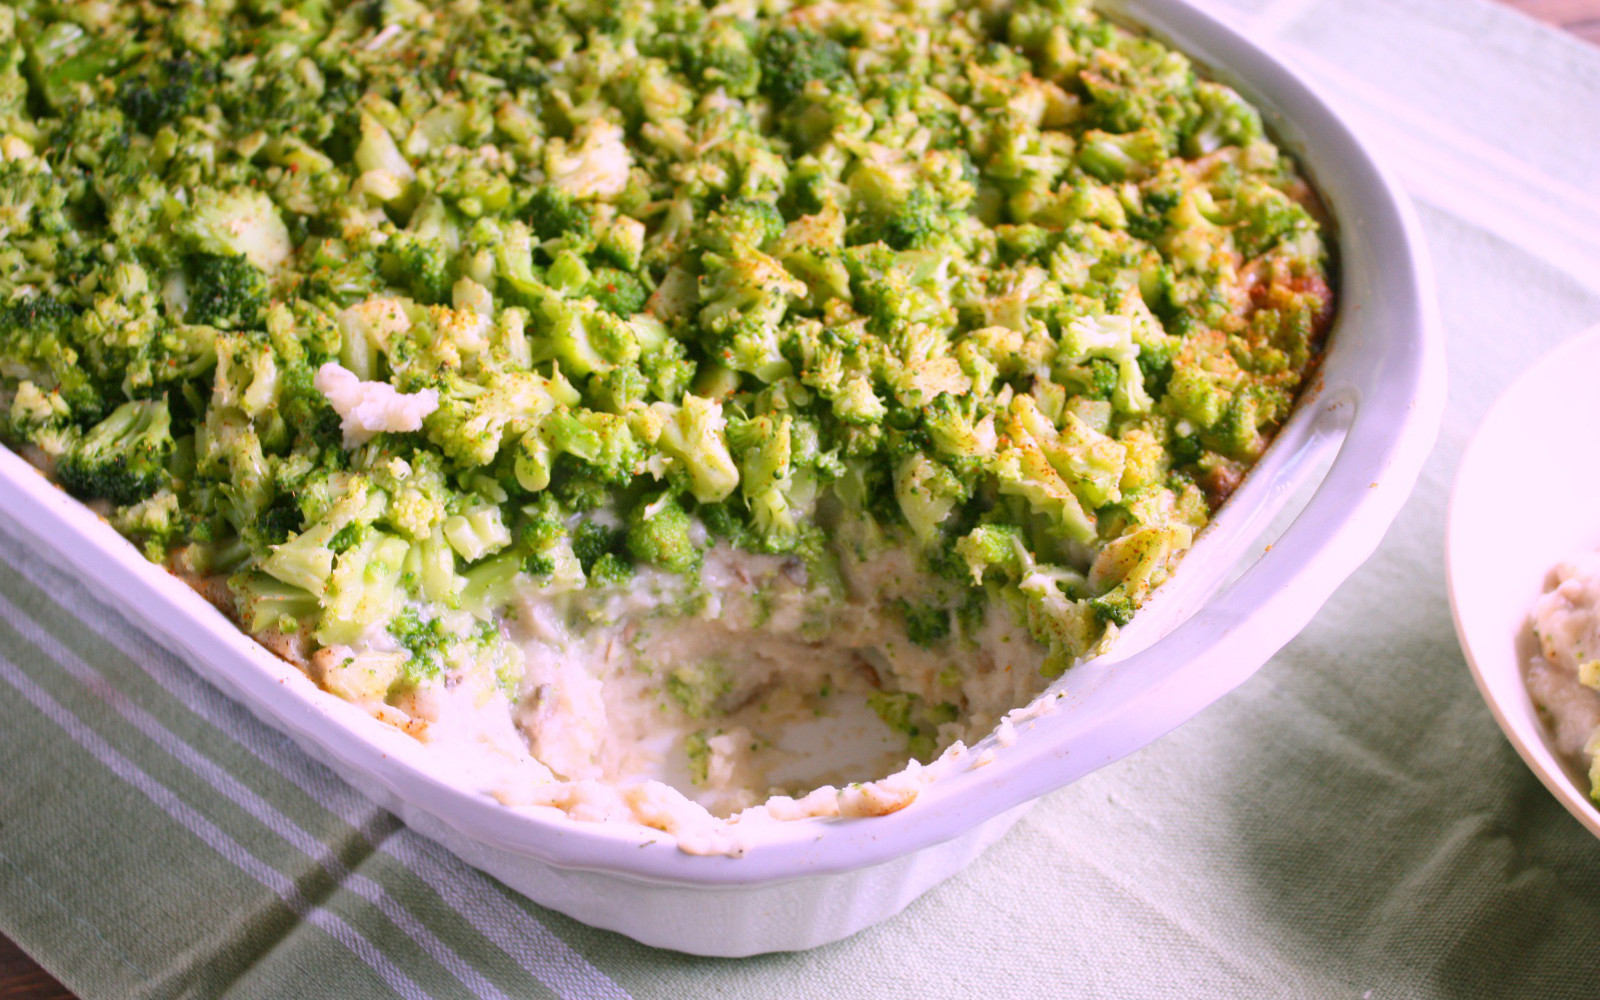 15 Amazing Vegan Recipes Powered By Nutritious And Delicious Broccoli One Green Planet